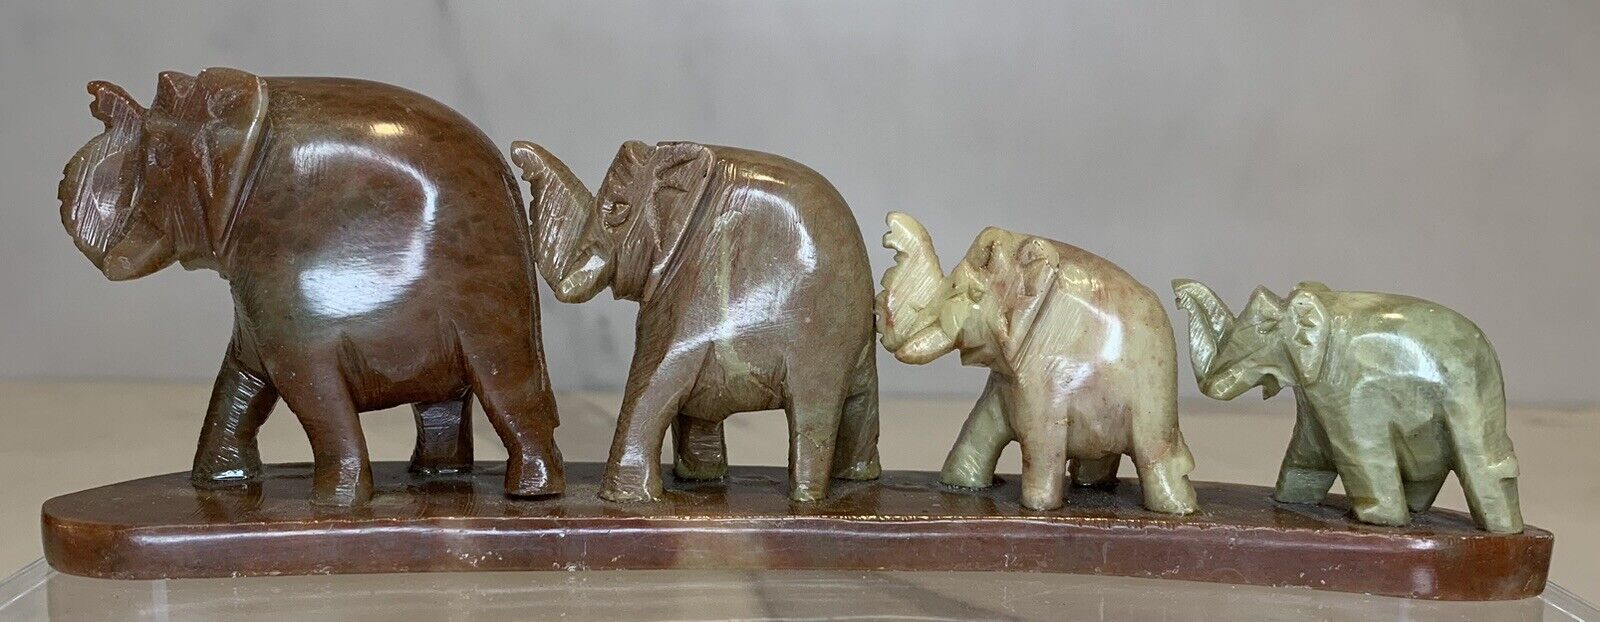 Vintage Four Elephants In a Row Carved Stone Made in India